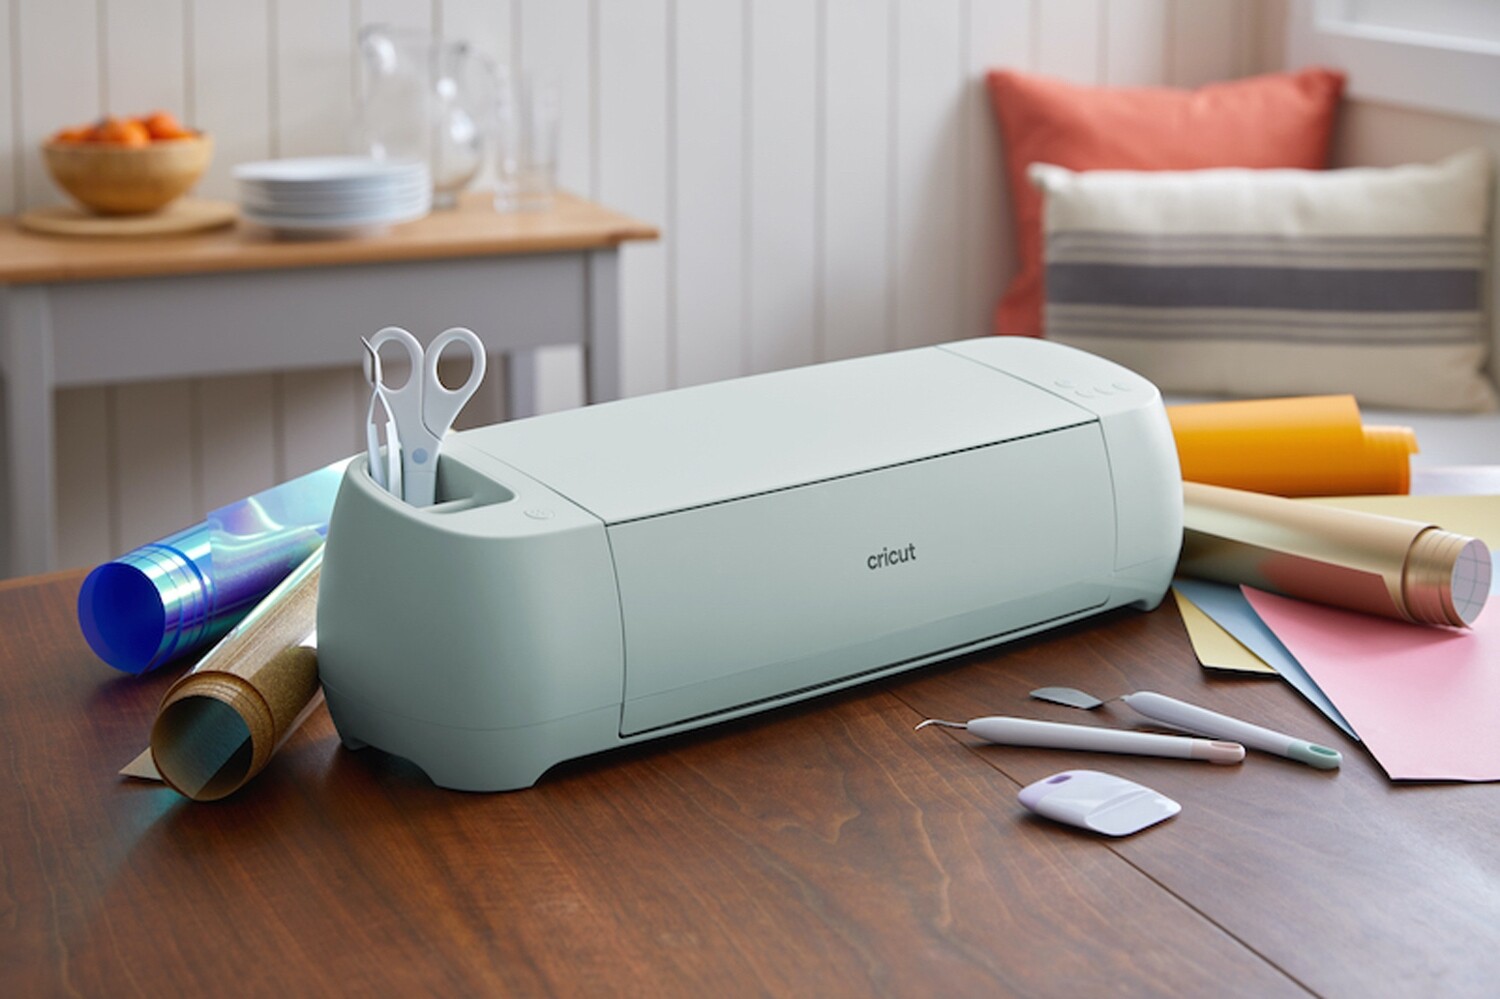 Cricut for Beginners! Monday 16th May 10am-12pm